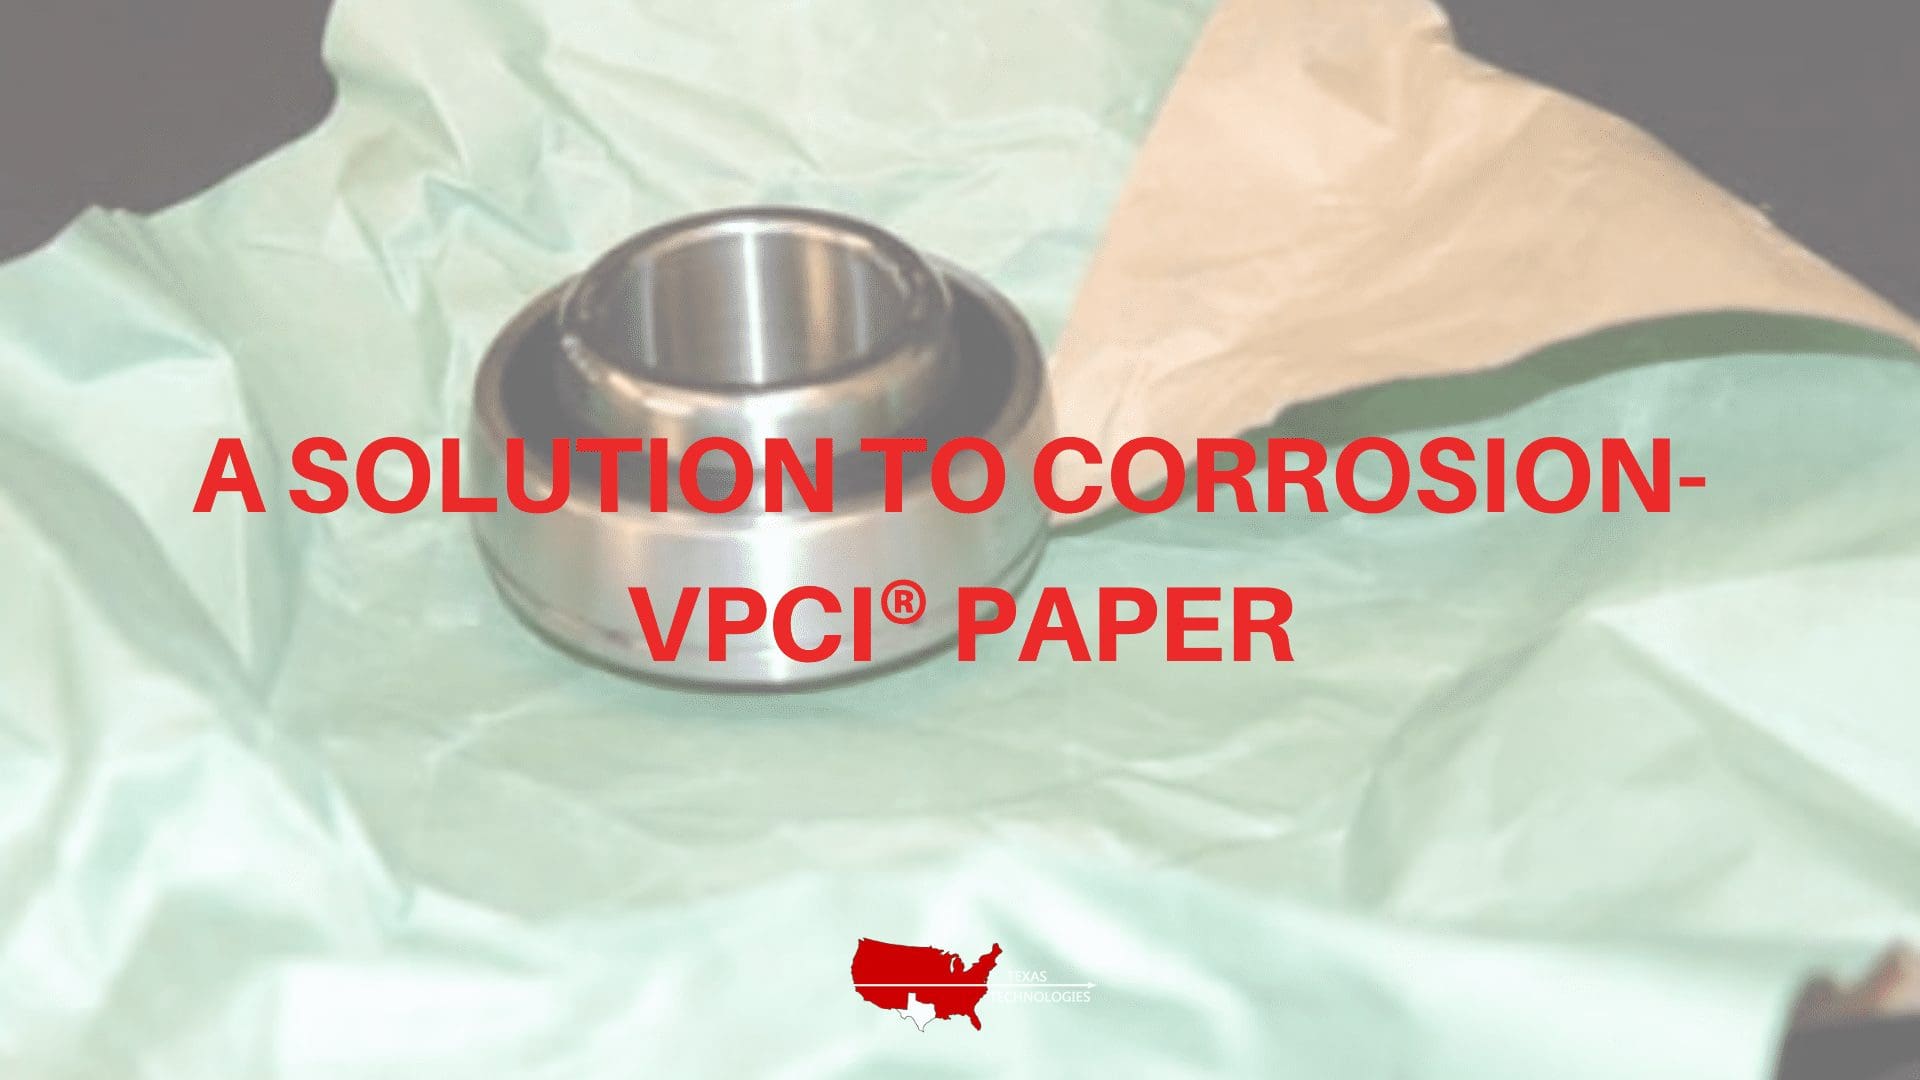 A Solution to Corrosion- VpCI® Paper